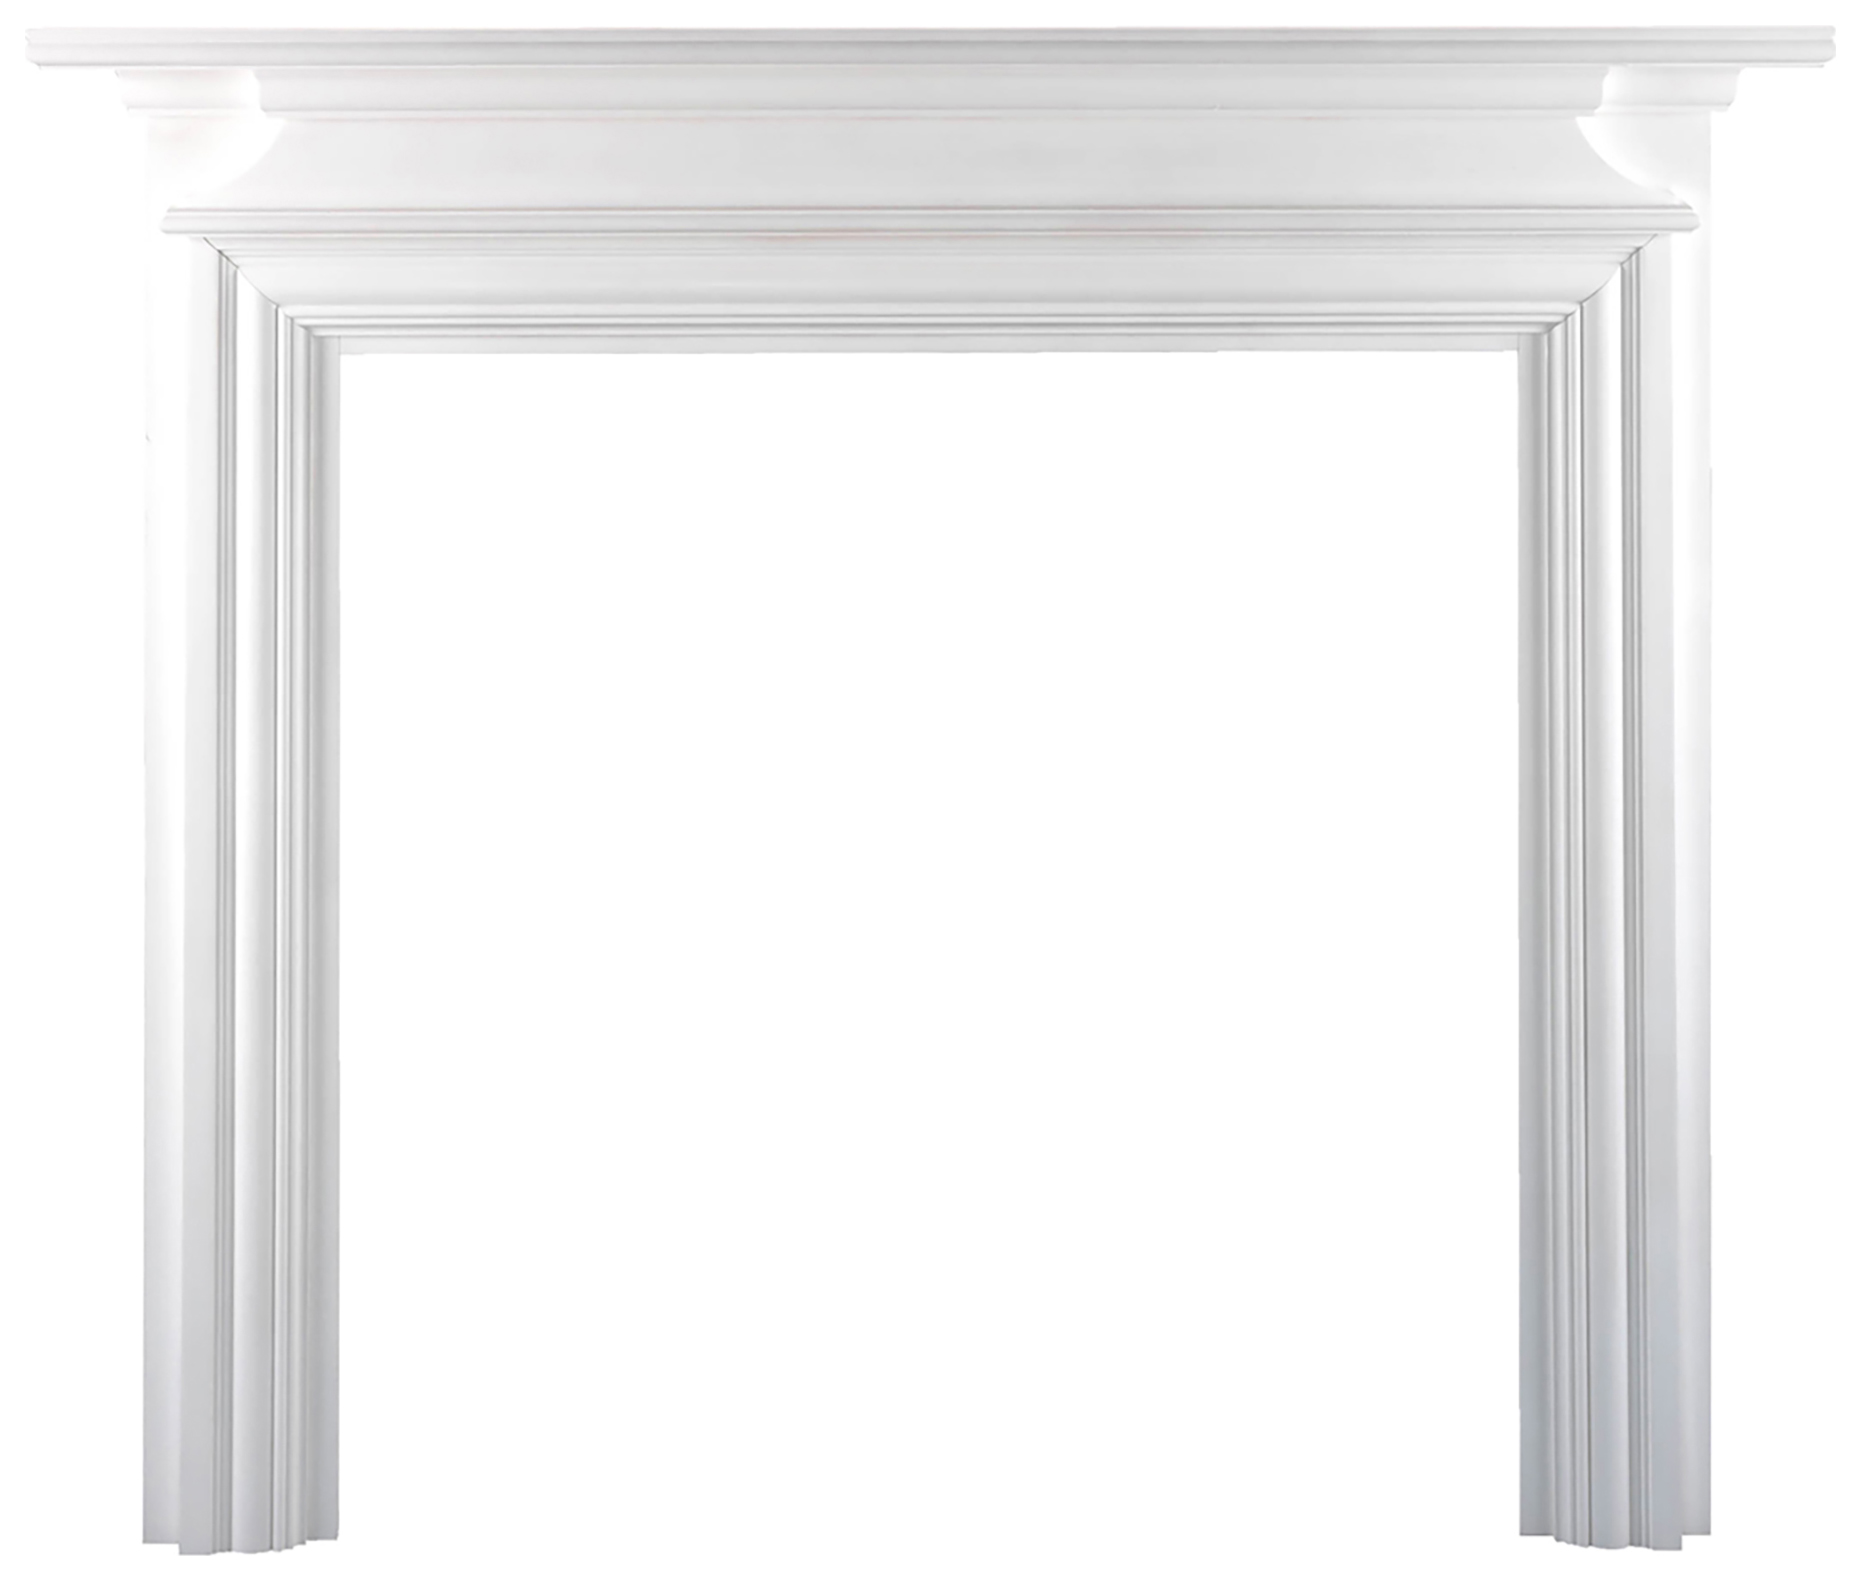 Image of Focal Point Regent White Fire Surround